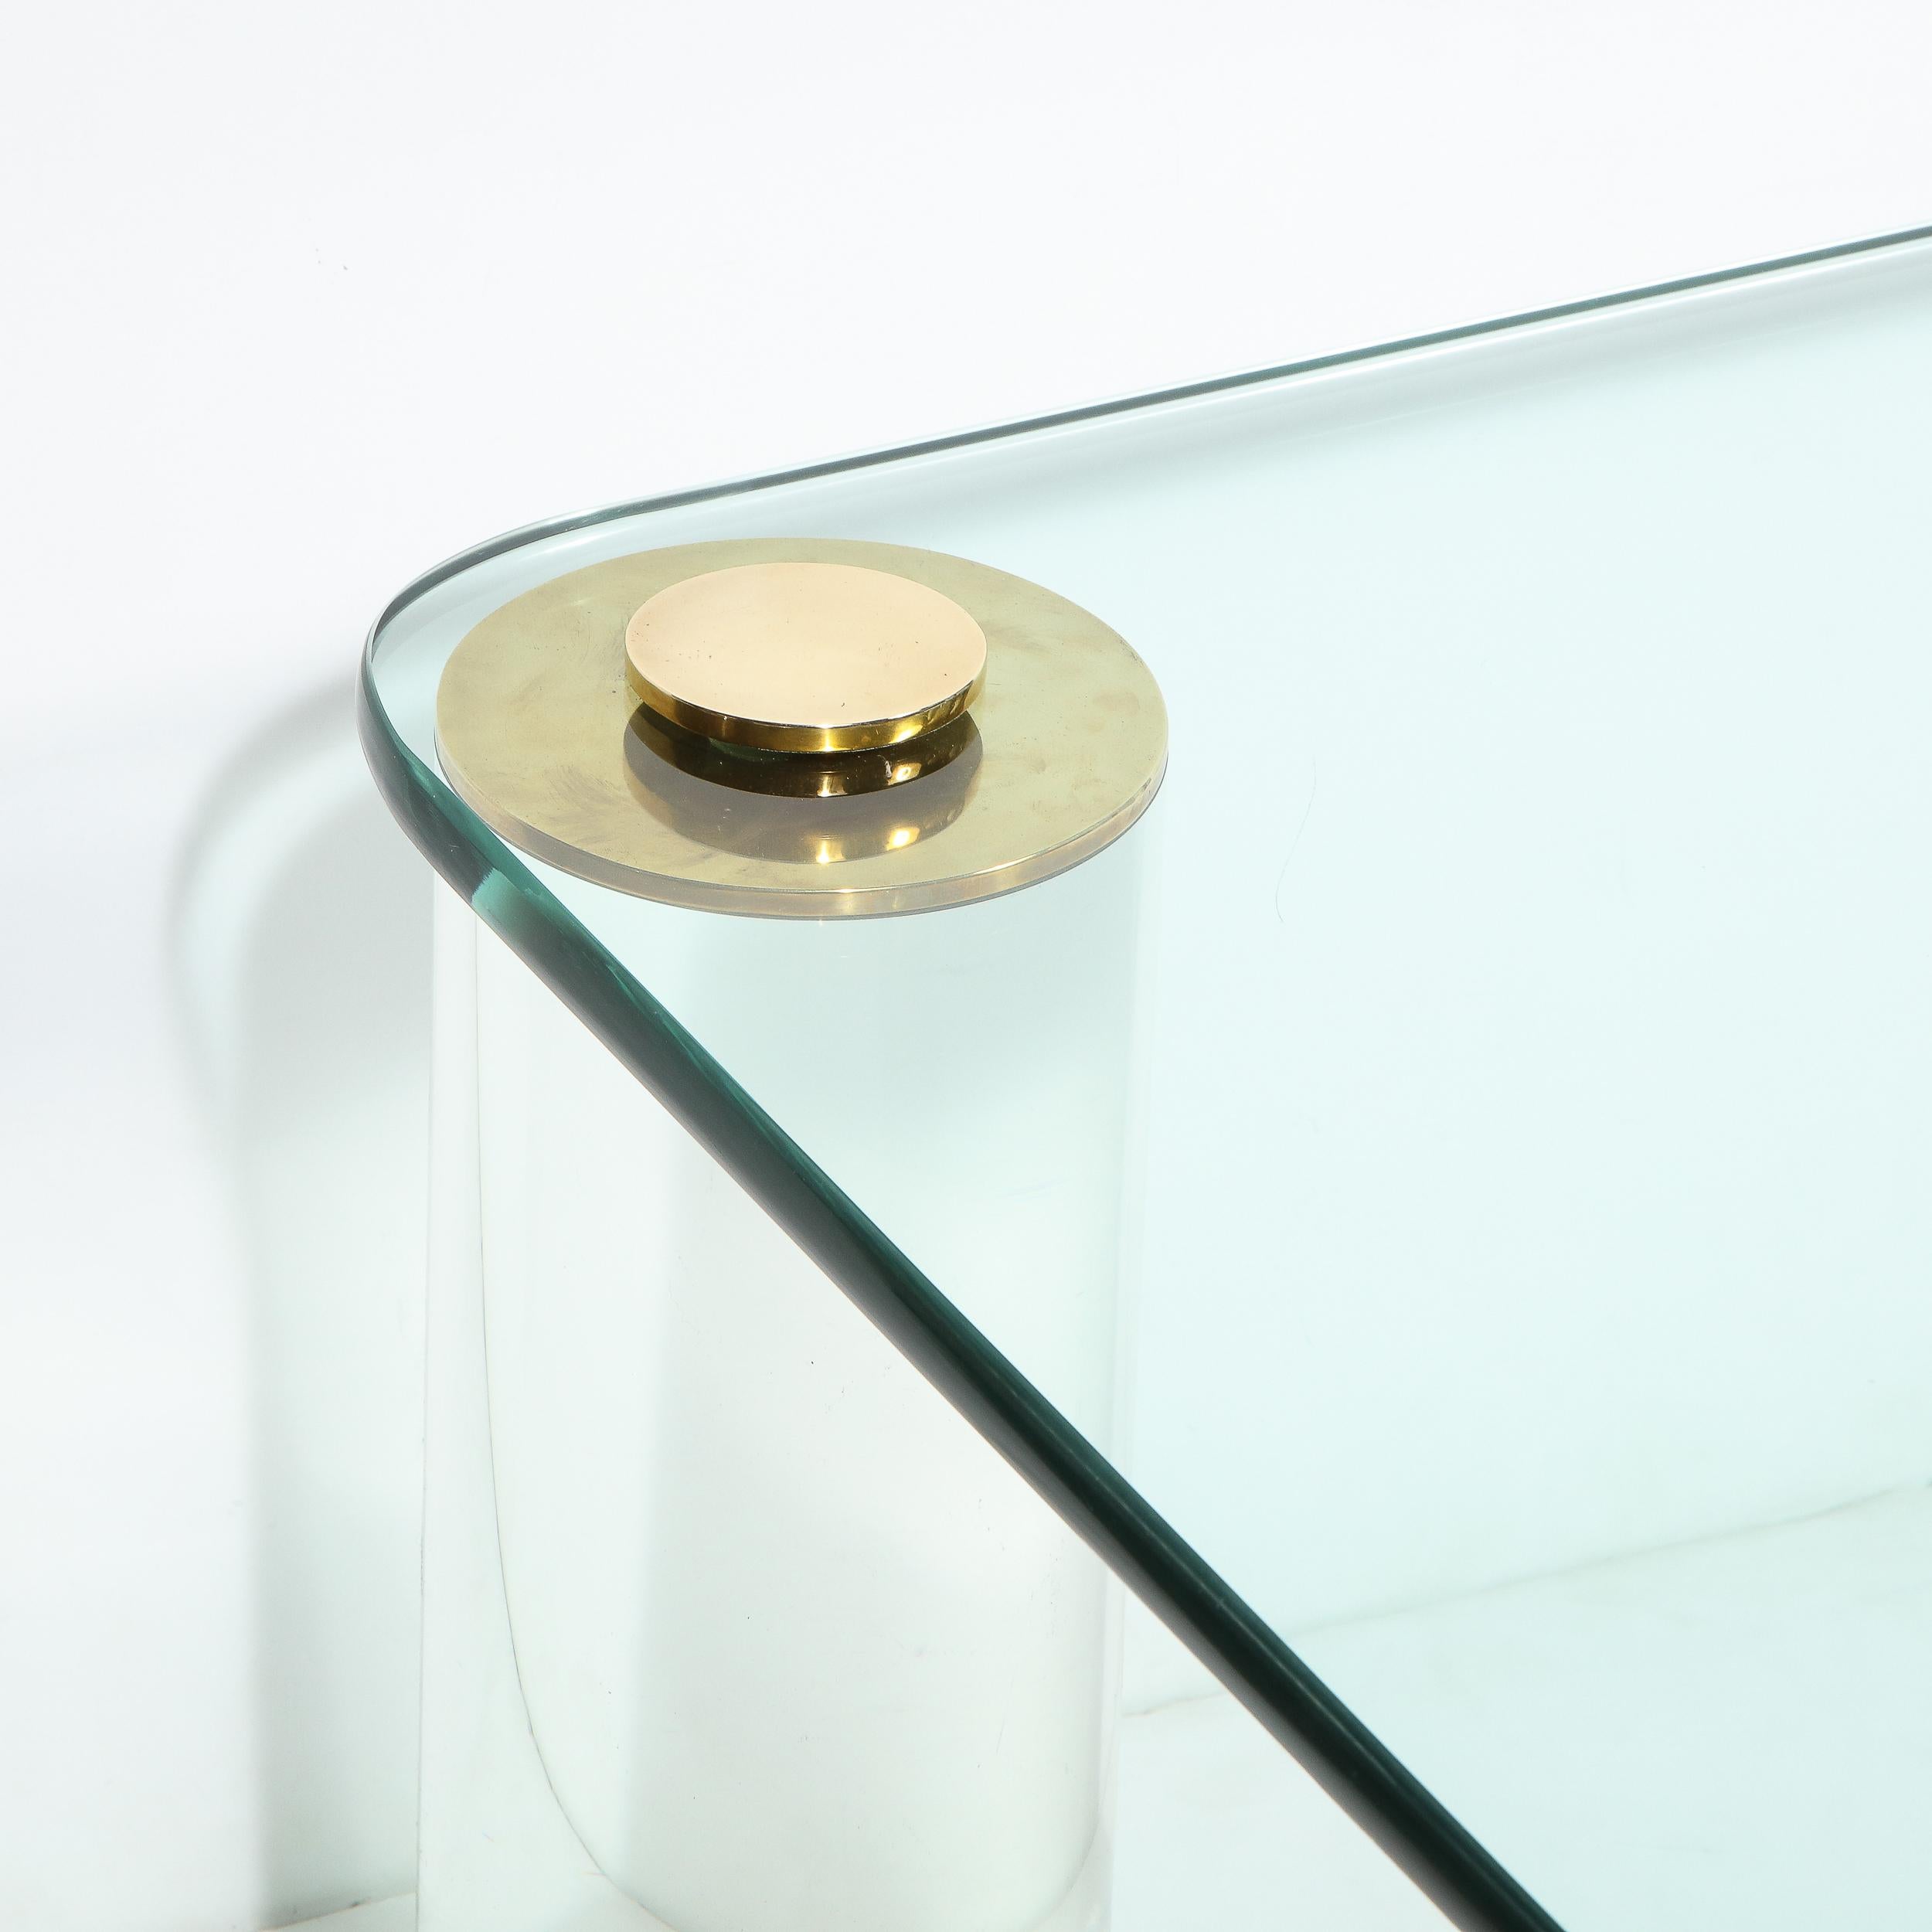 Late 20th Century Mid-Century Modern Brass and Glass Cocktail Table with Cylindrical Lucite Legs